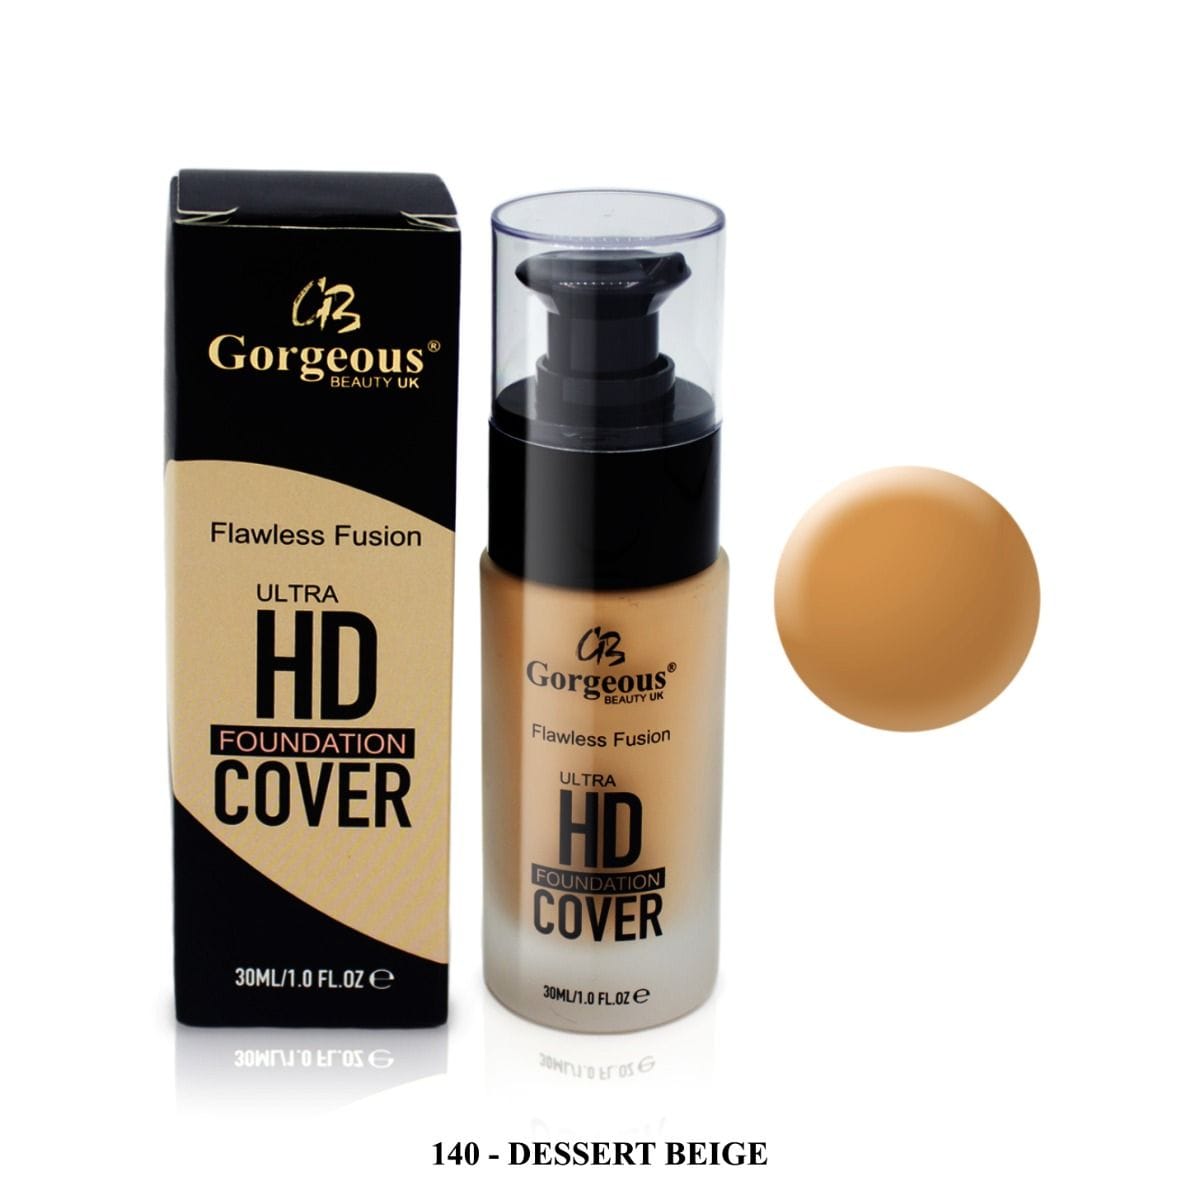 Gorgeous Beauty Flawless Fusion Hd Ultra Foundation Cover-140 Dessert Beige 30Ml